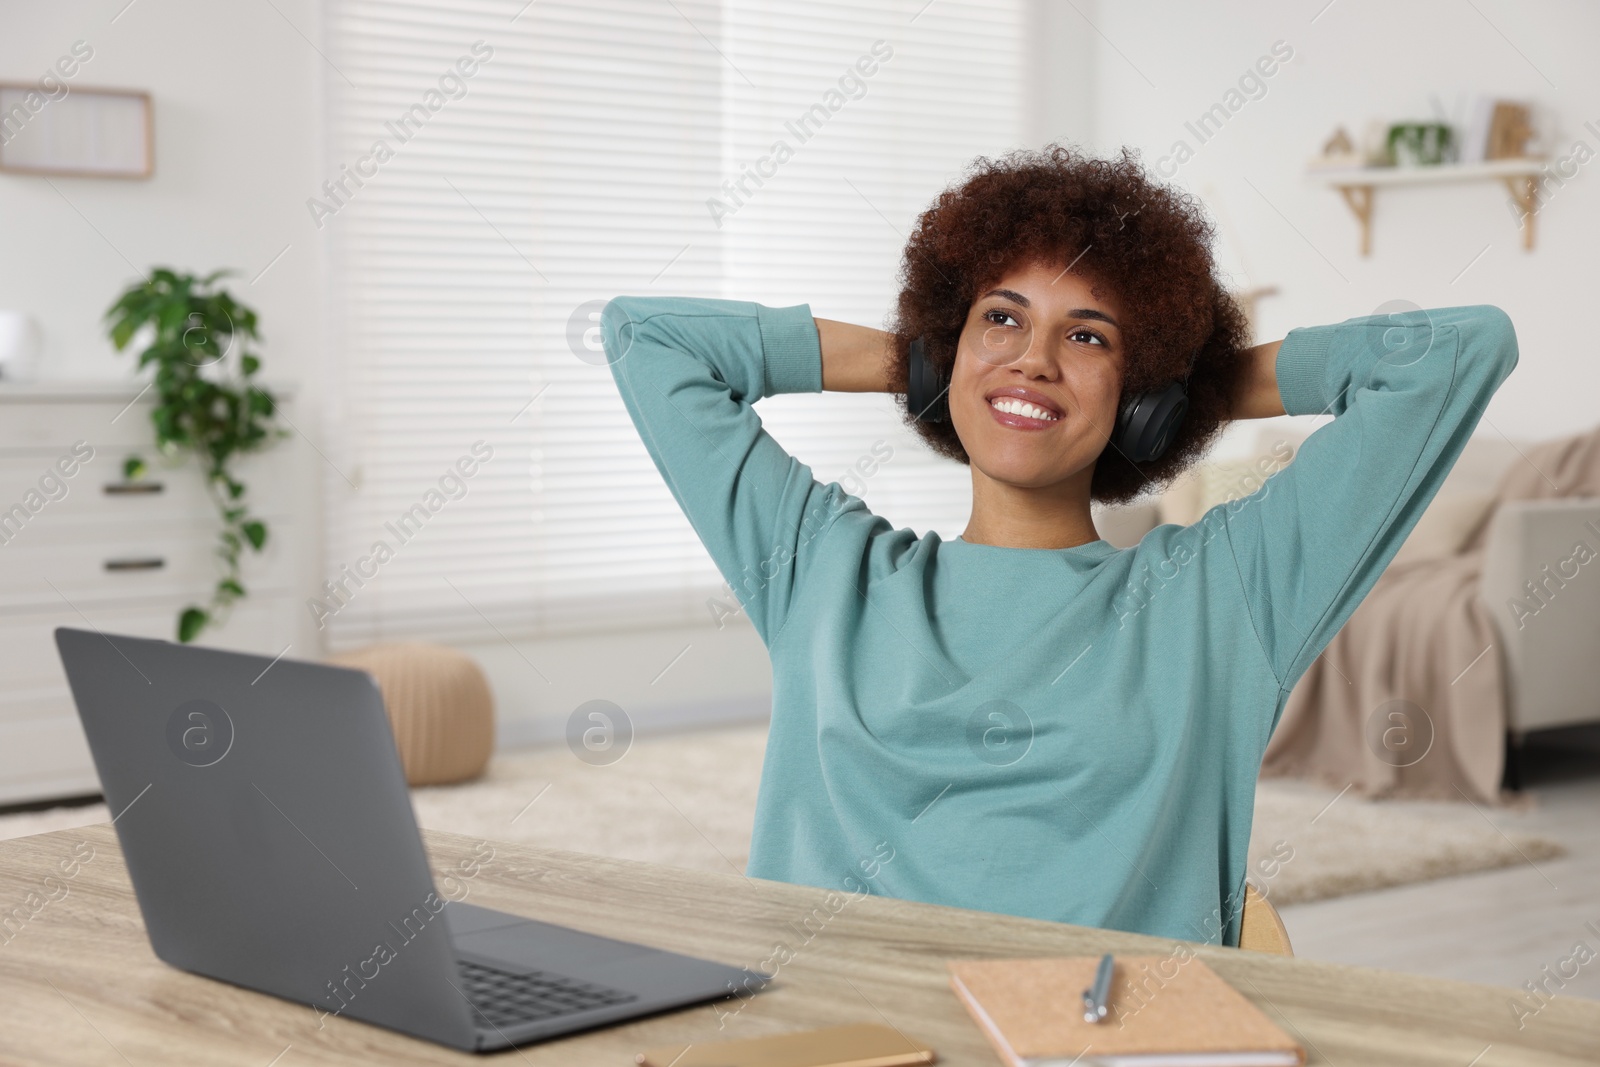 Photo of Young woman in headphones using laptop at wooden desk in room